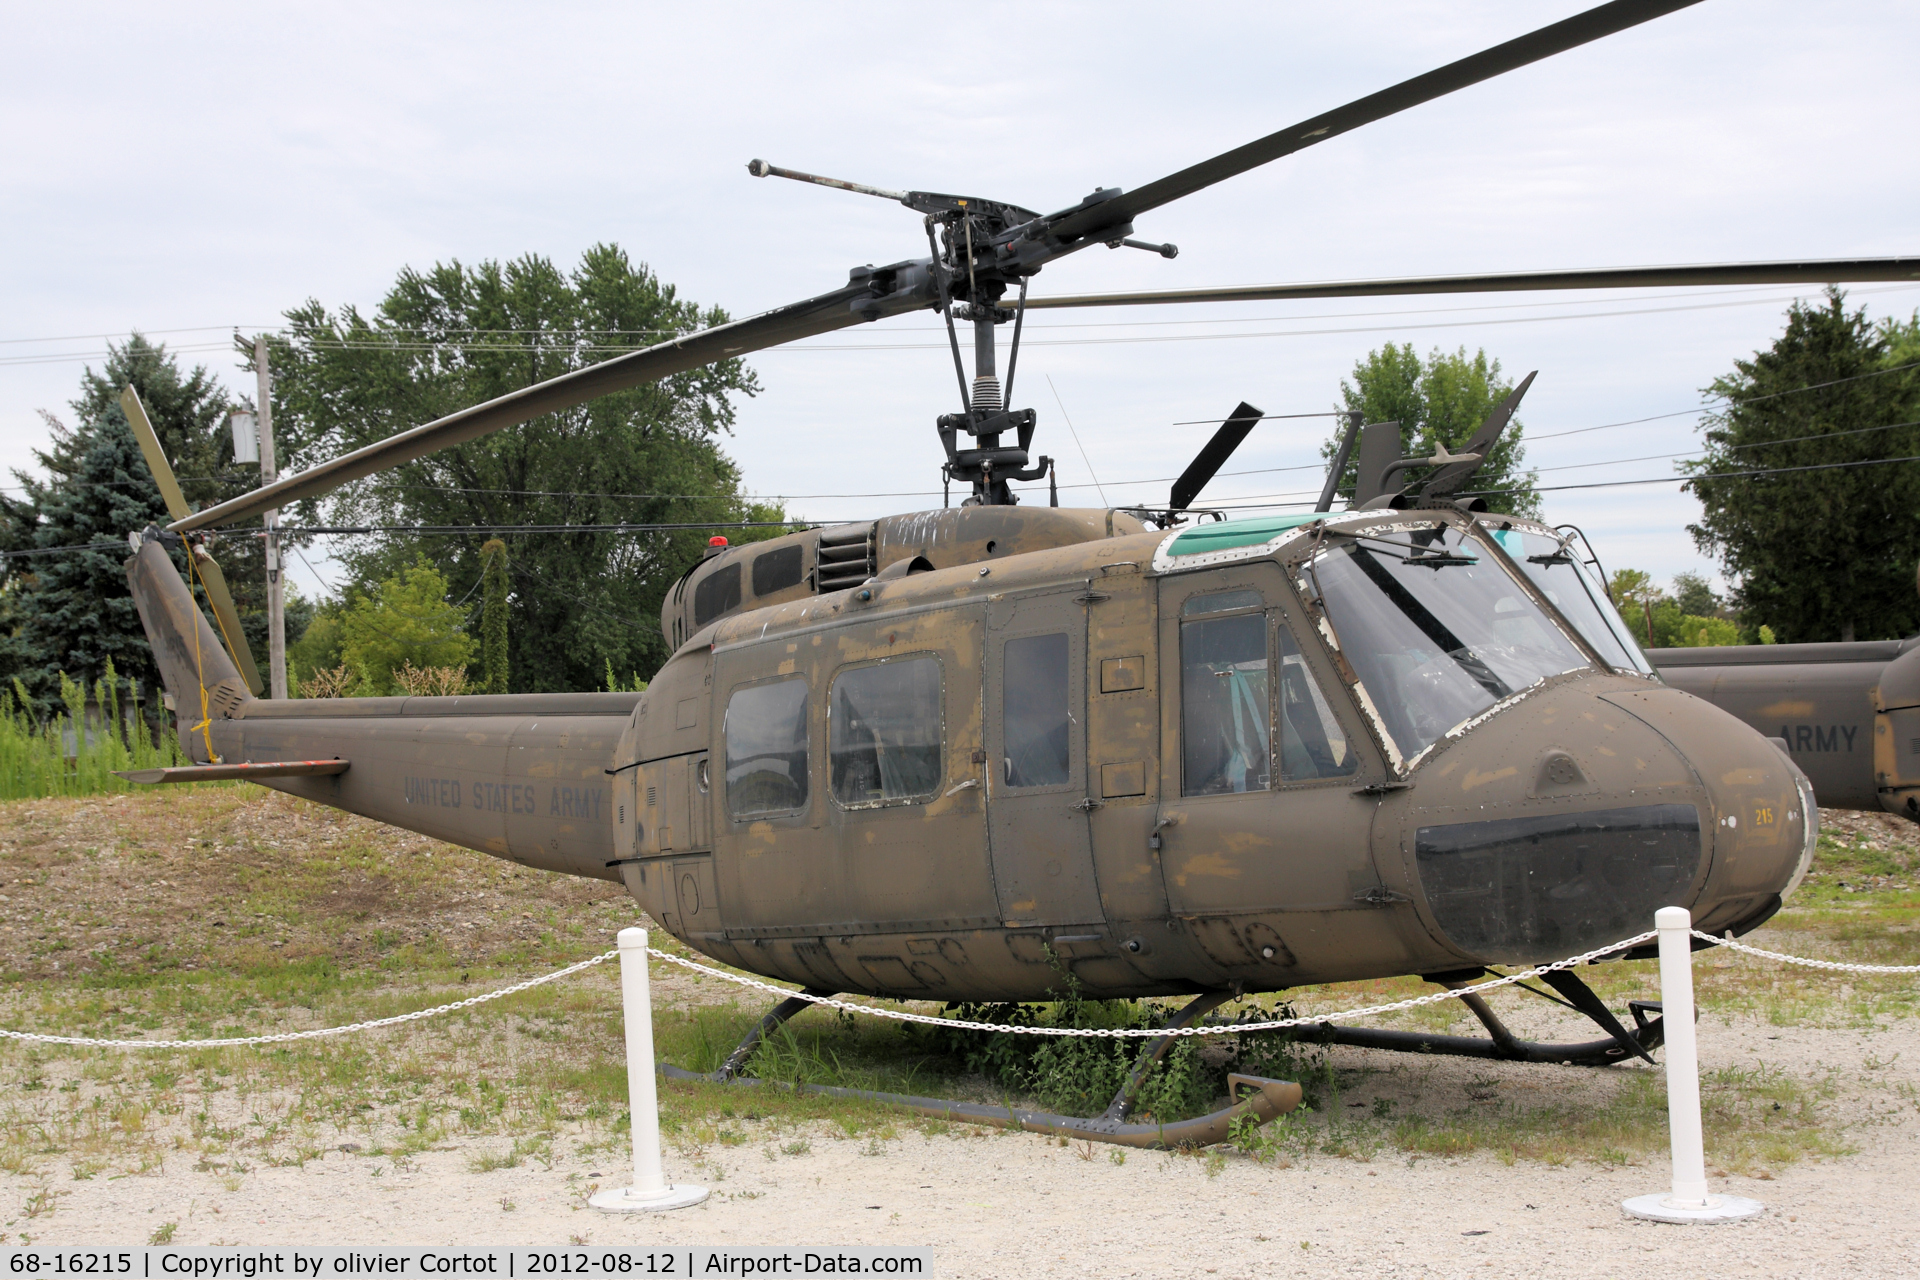 68-16215, 1968 Bell UH-1H Iroquois C/N 10874, bad weather effects on this Huey